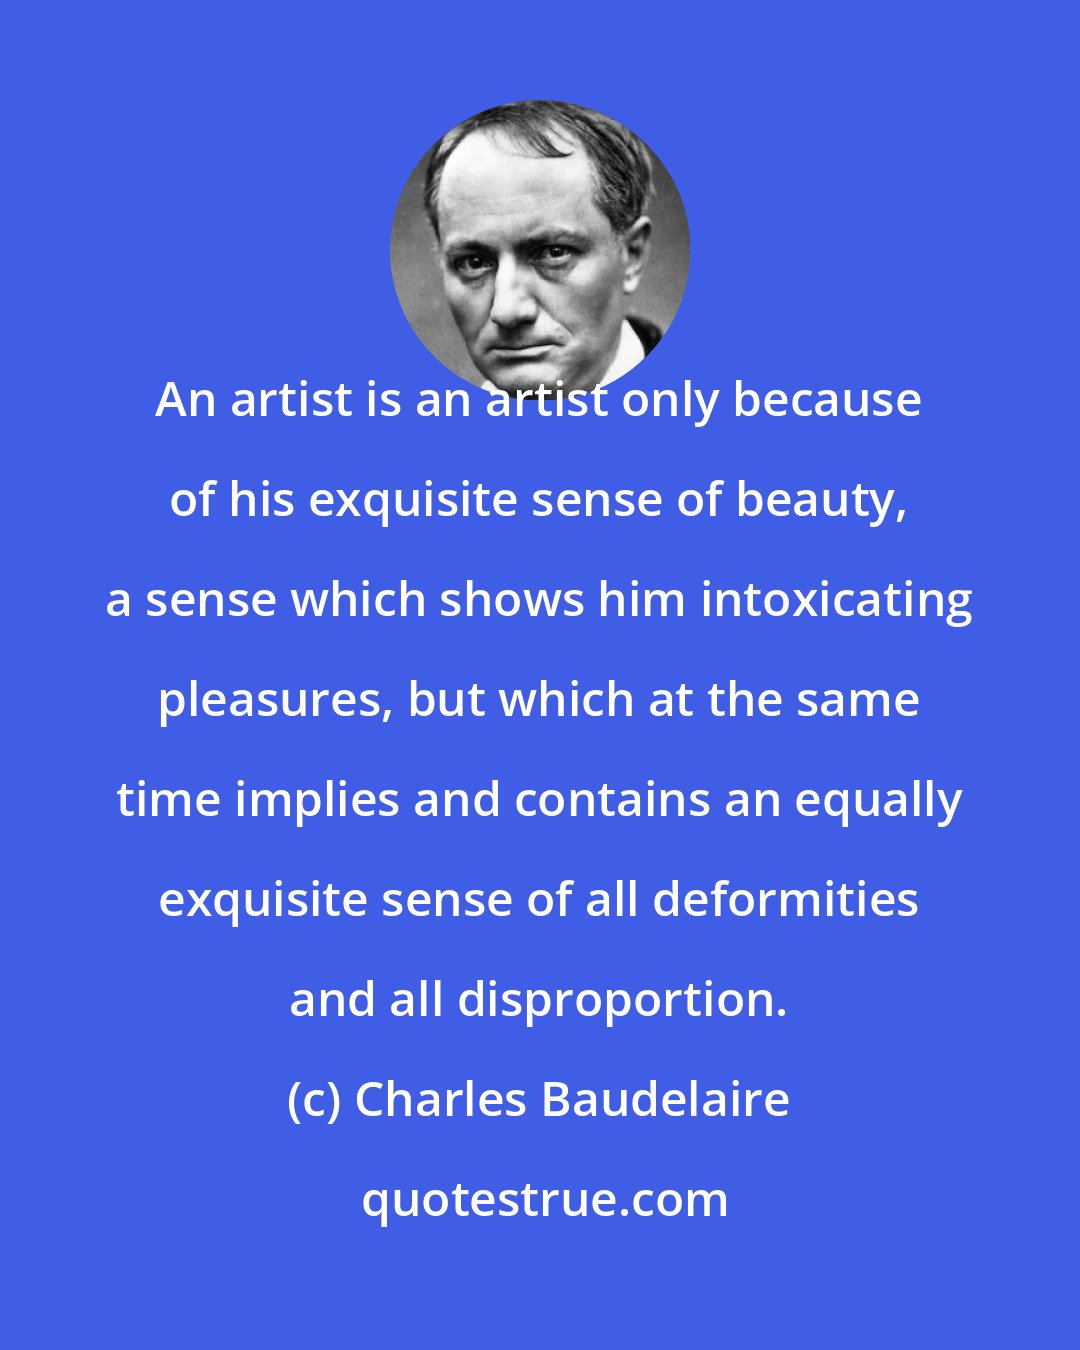 Charles Baudelaire: An artist is an artist only because of his exquisite sense of beauty, a sense which shows him intoxicating pleasures, but which at the same time implies and contains an equally exquisite sense of all deformities and all disproportion.